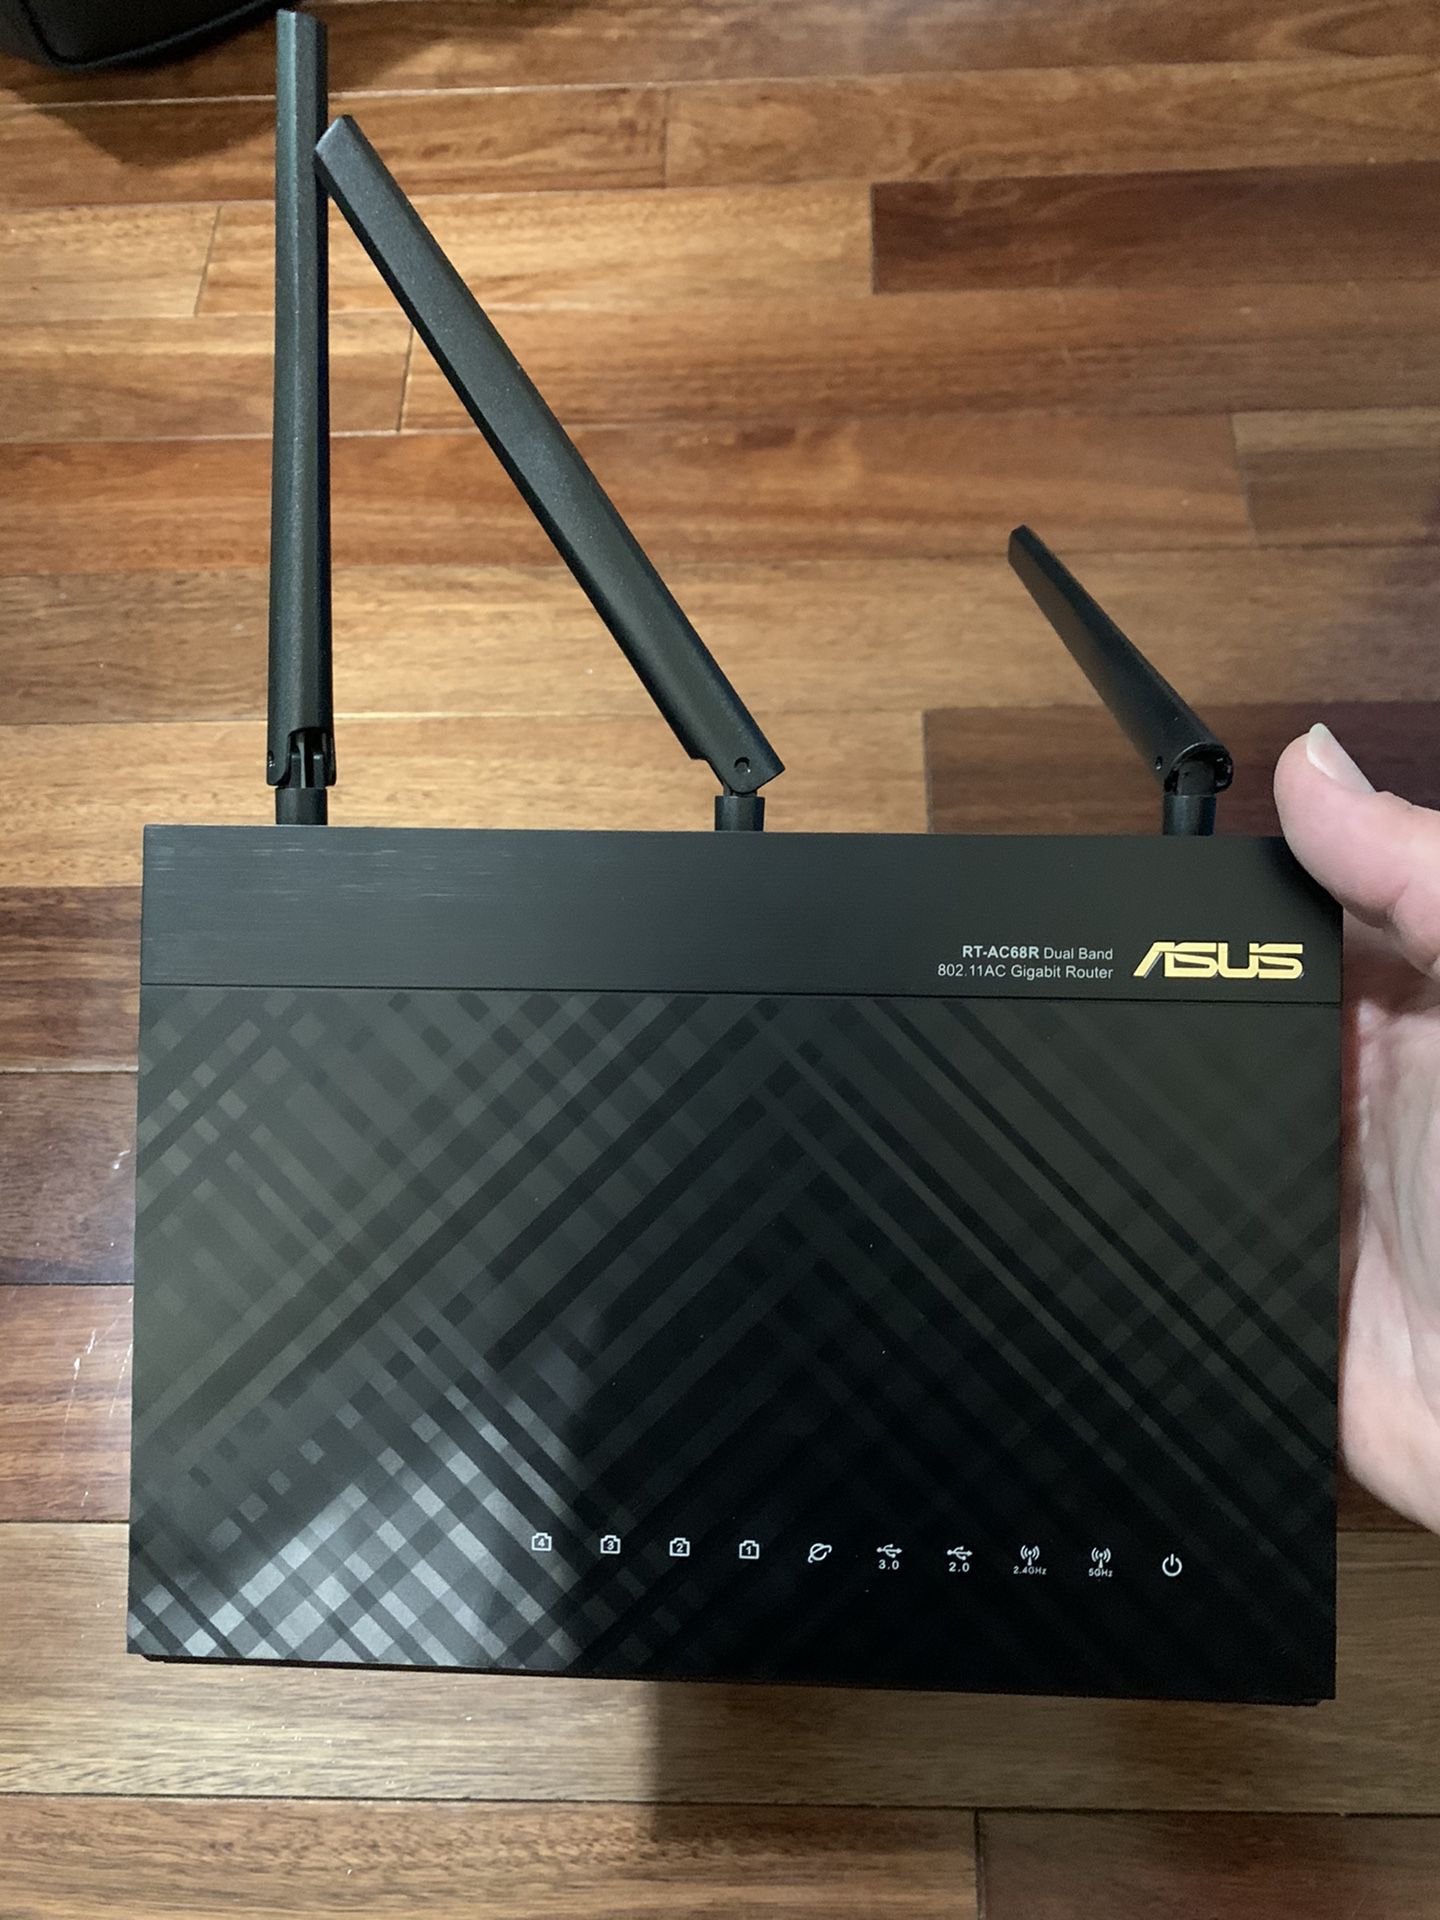 Asus RT-AC68R Wifi Router 